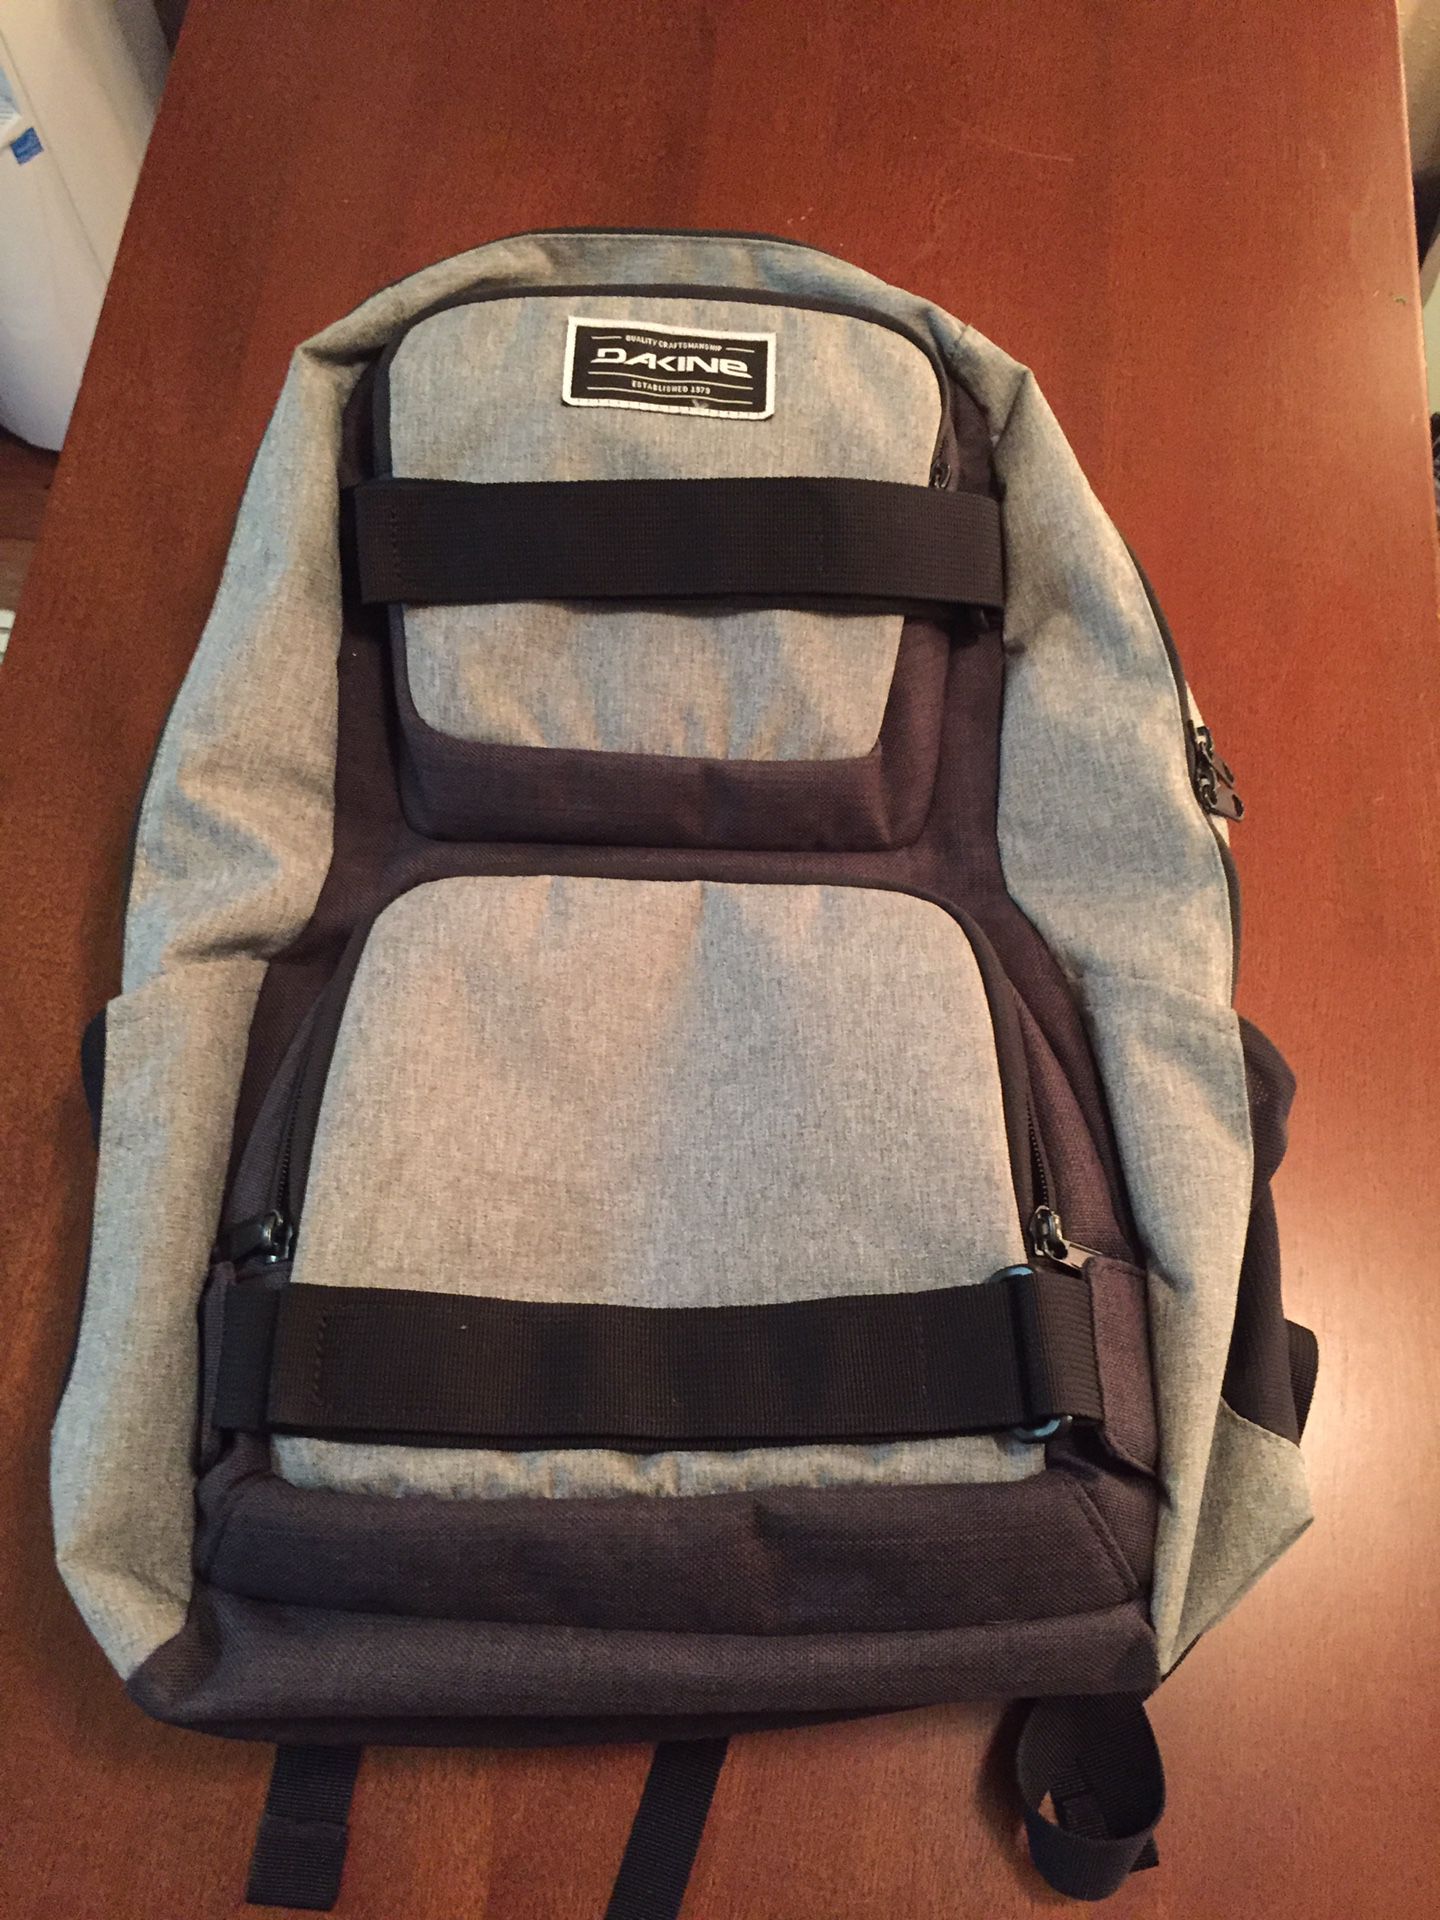 Backpack Dakine Laptop compartment